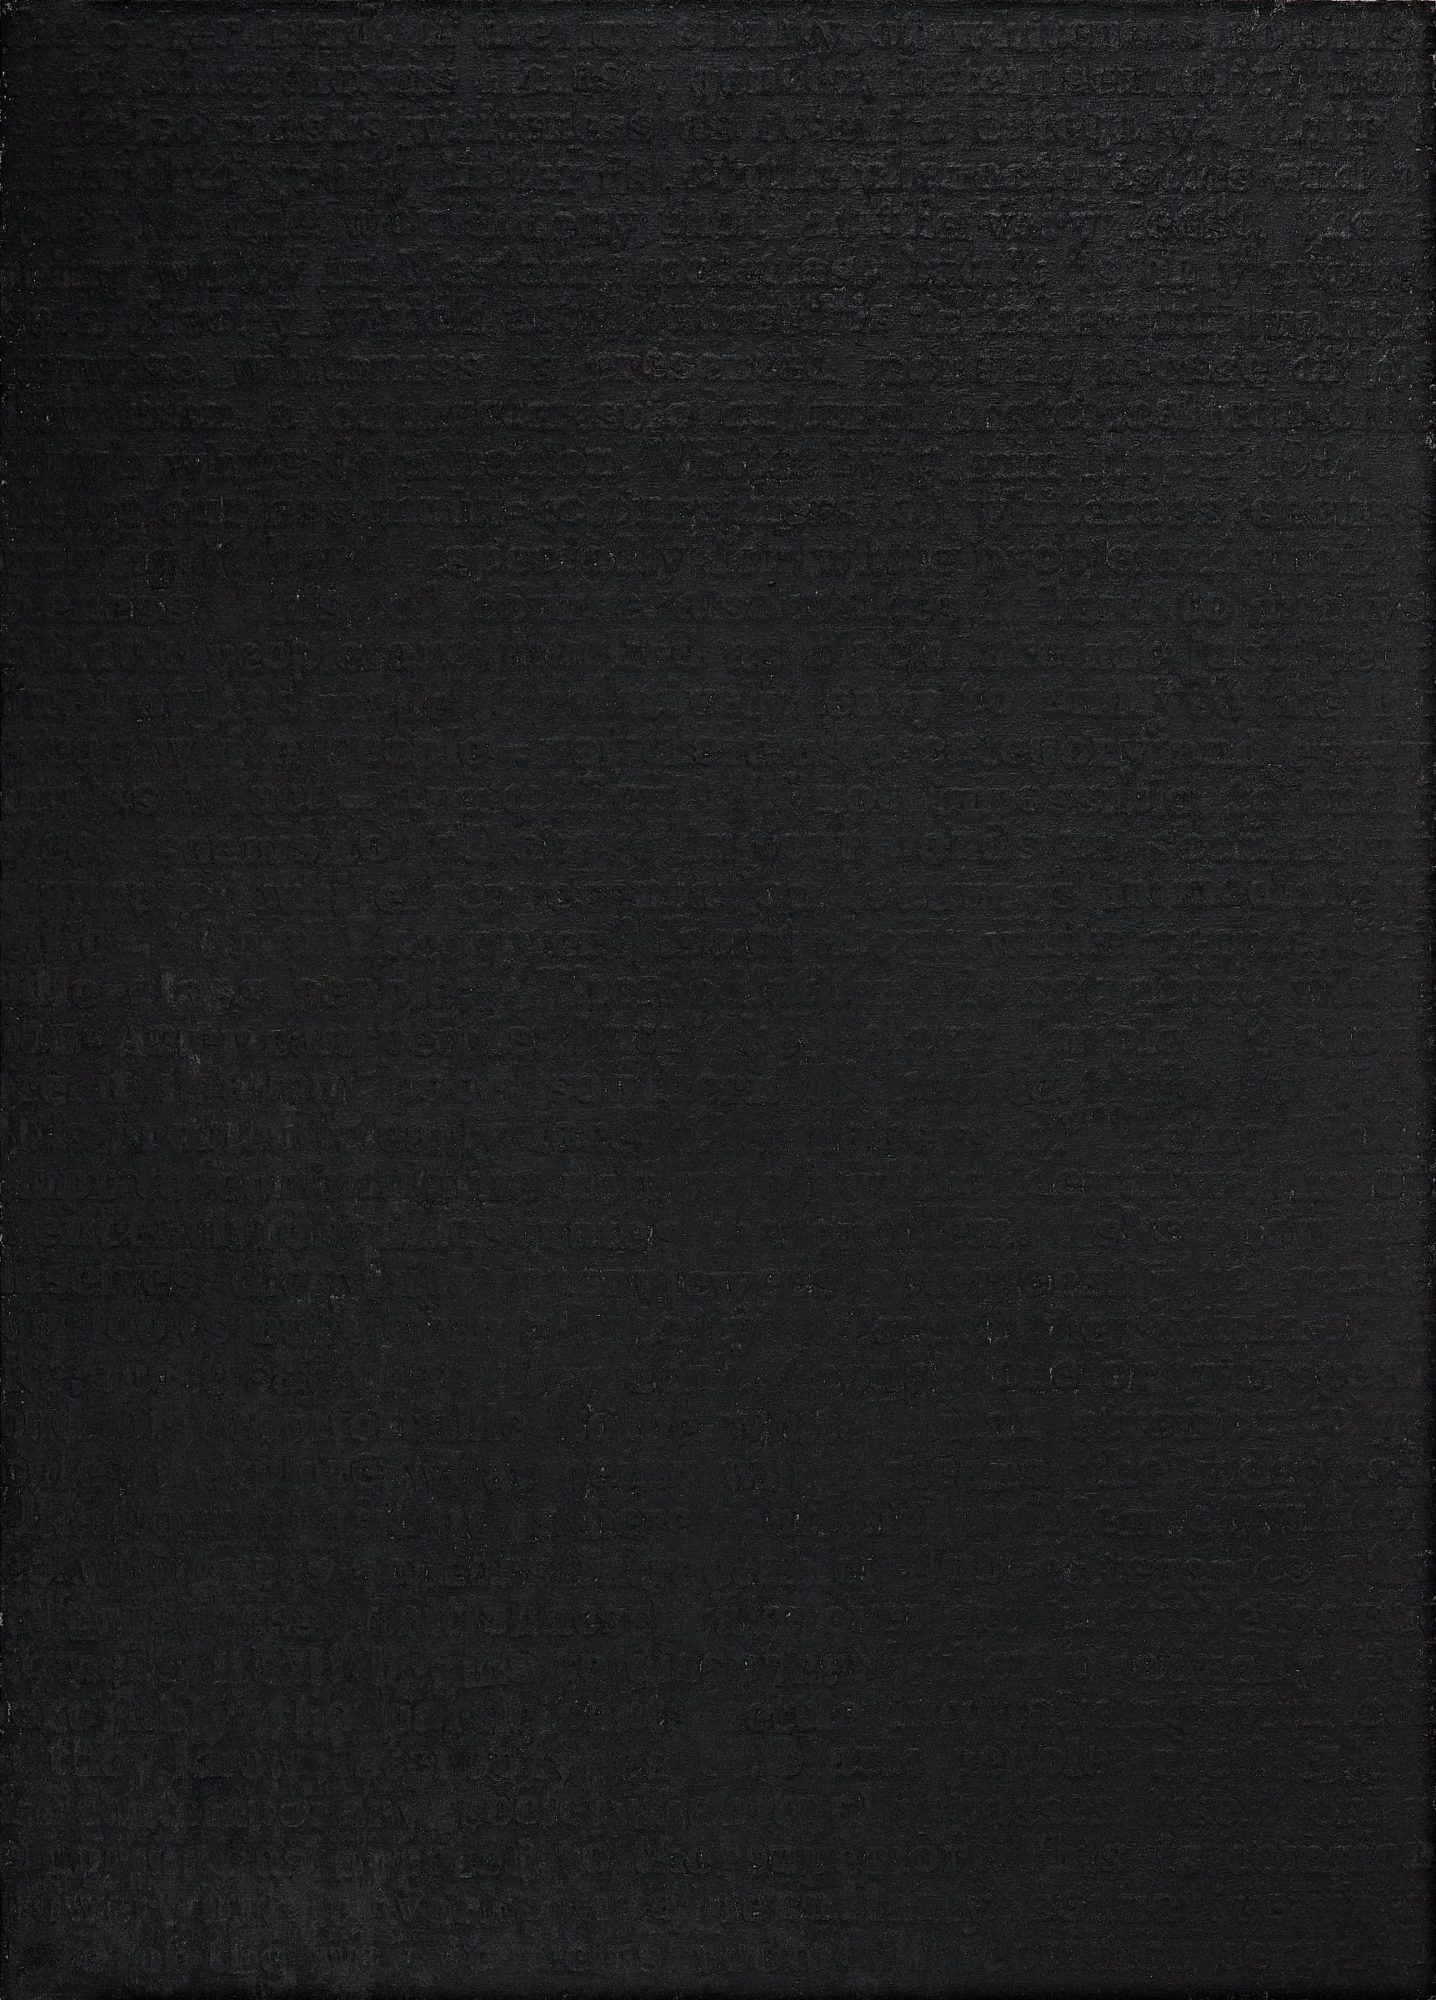 image of textured dark colored oil painting